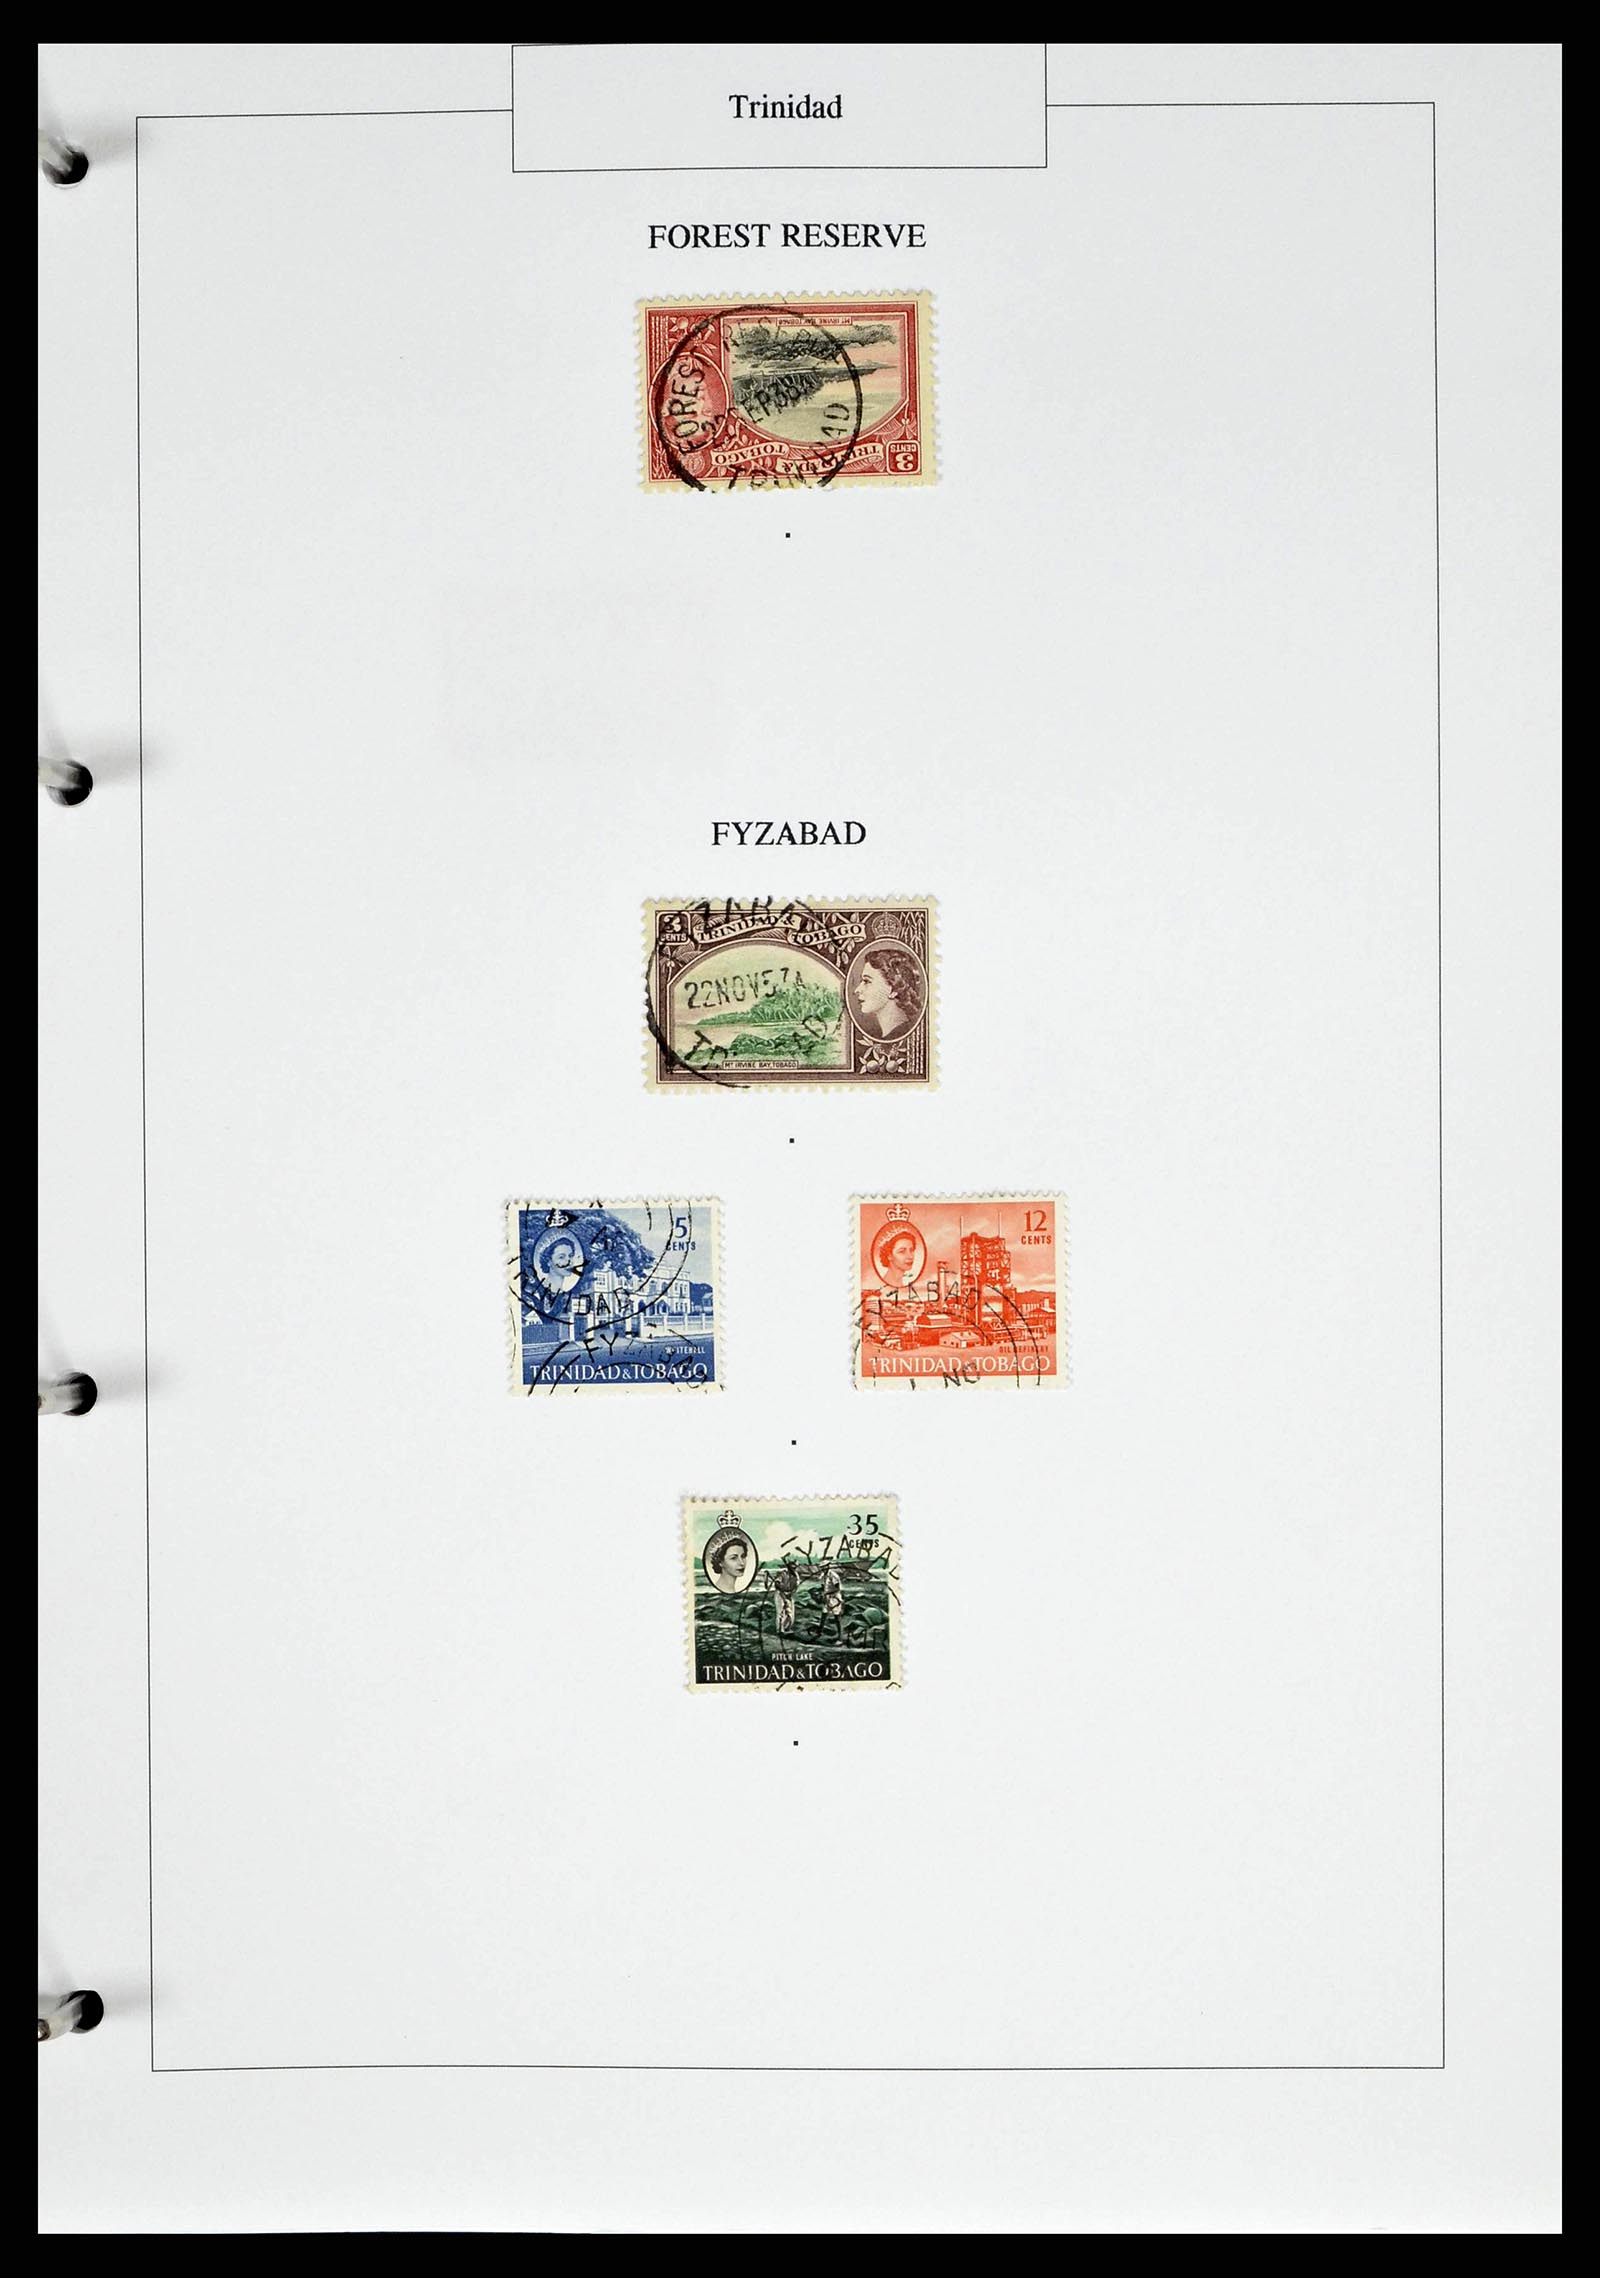 38481 0027 - Stamp collection 38481 Trinidad and Tobago cancels 1859-1960.